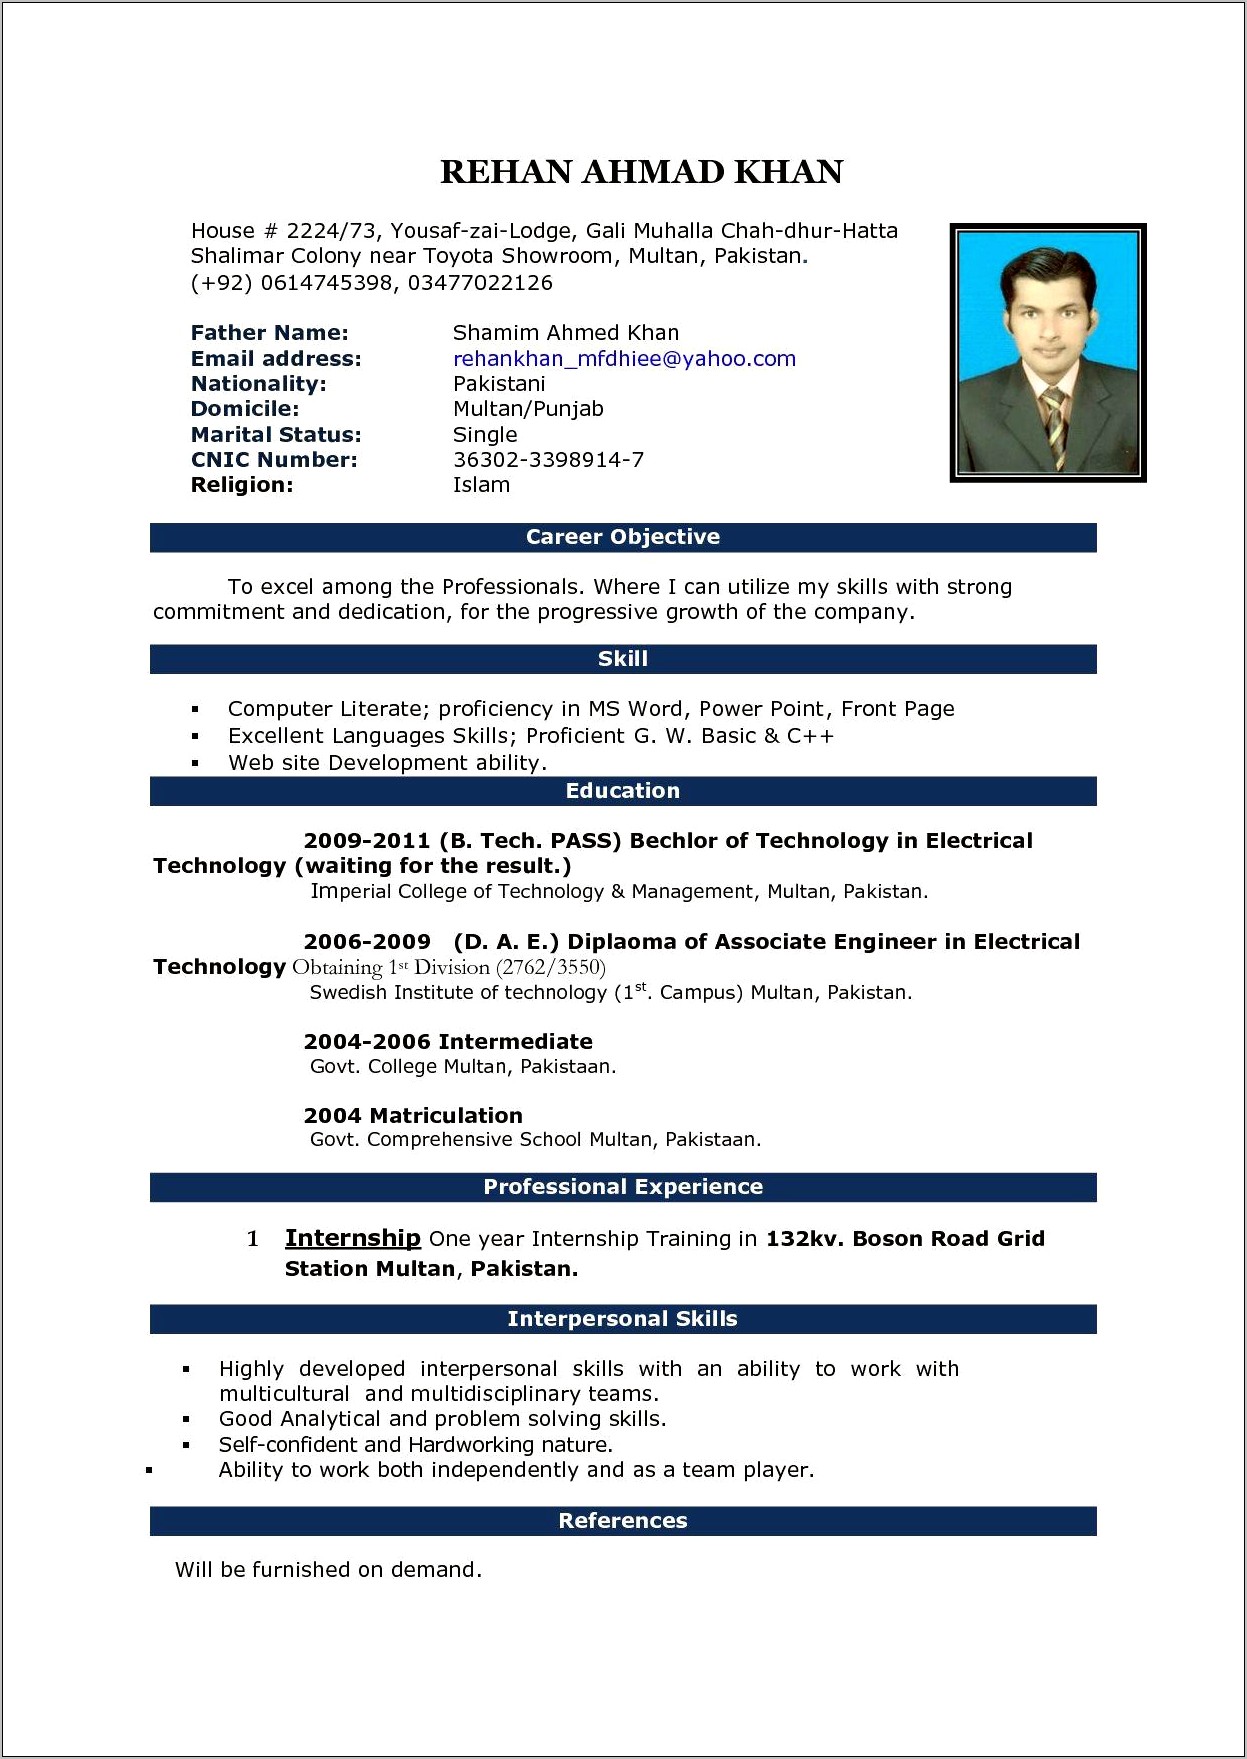 Download Resume Formats In Ms Word